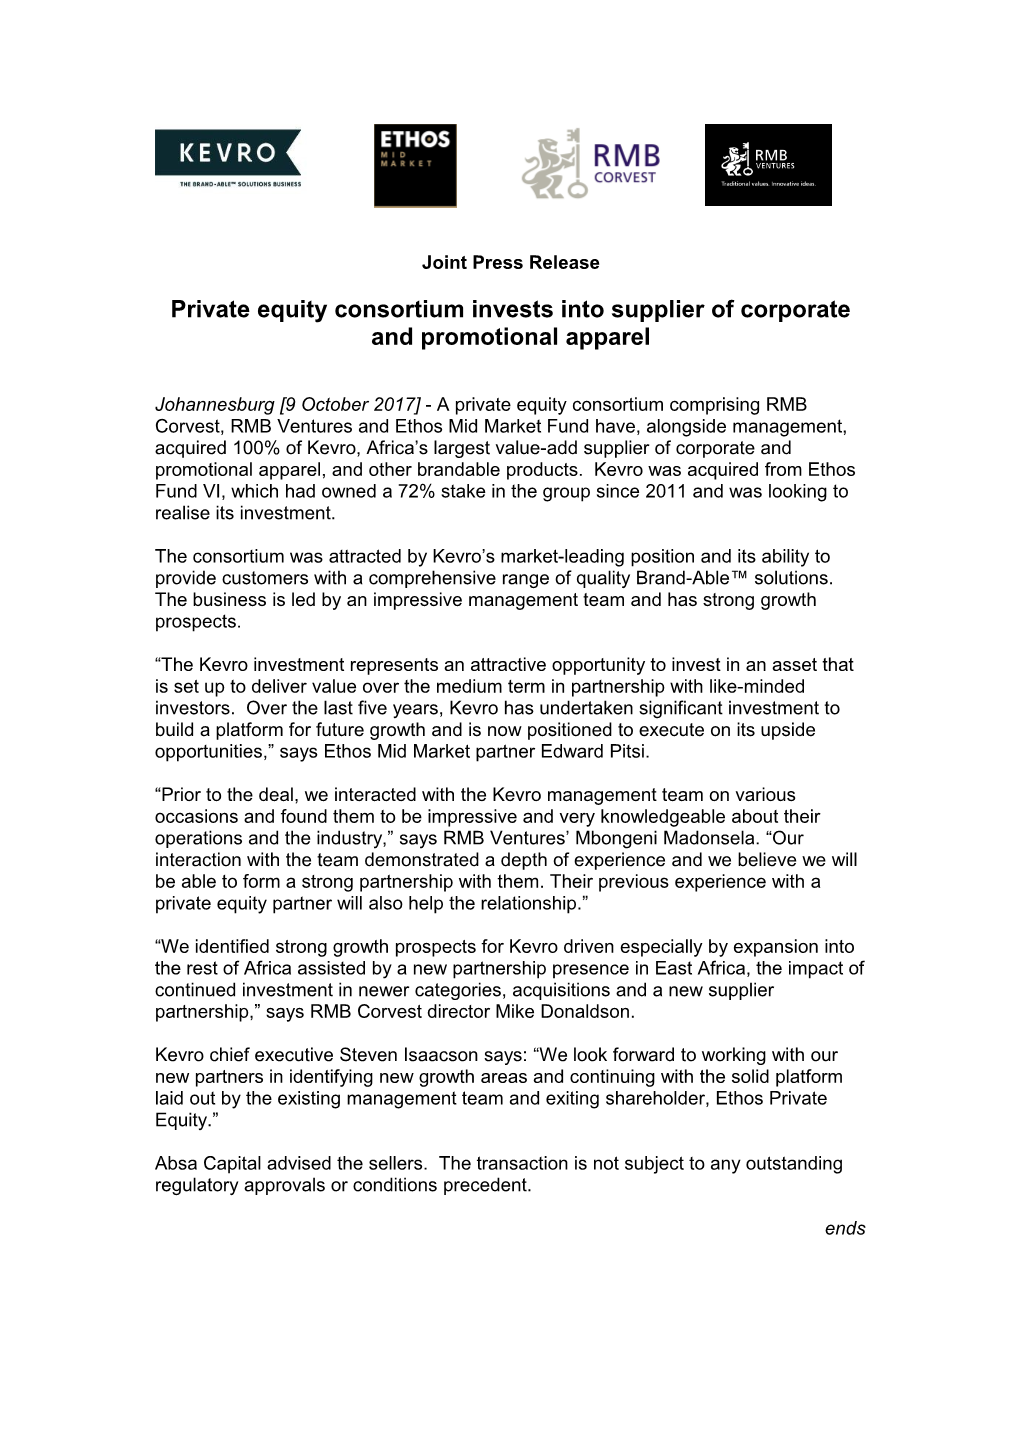 Private Equity Consortium Invests Into Supplier of Corporate and Promotional Apparel